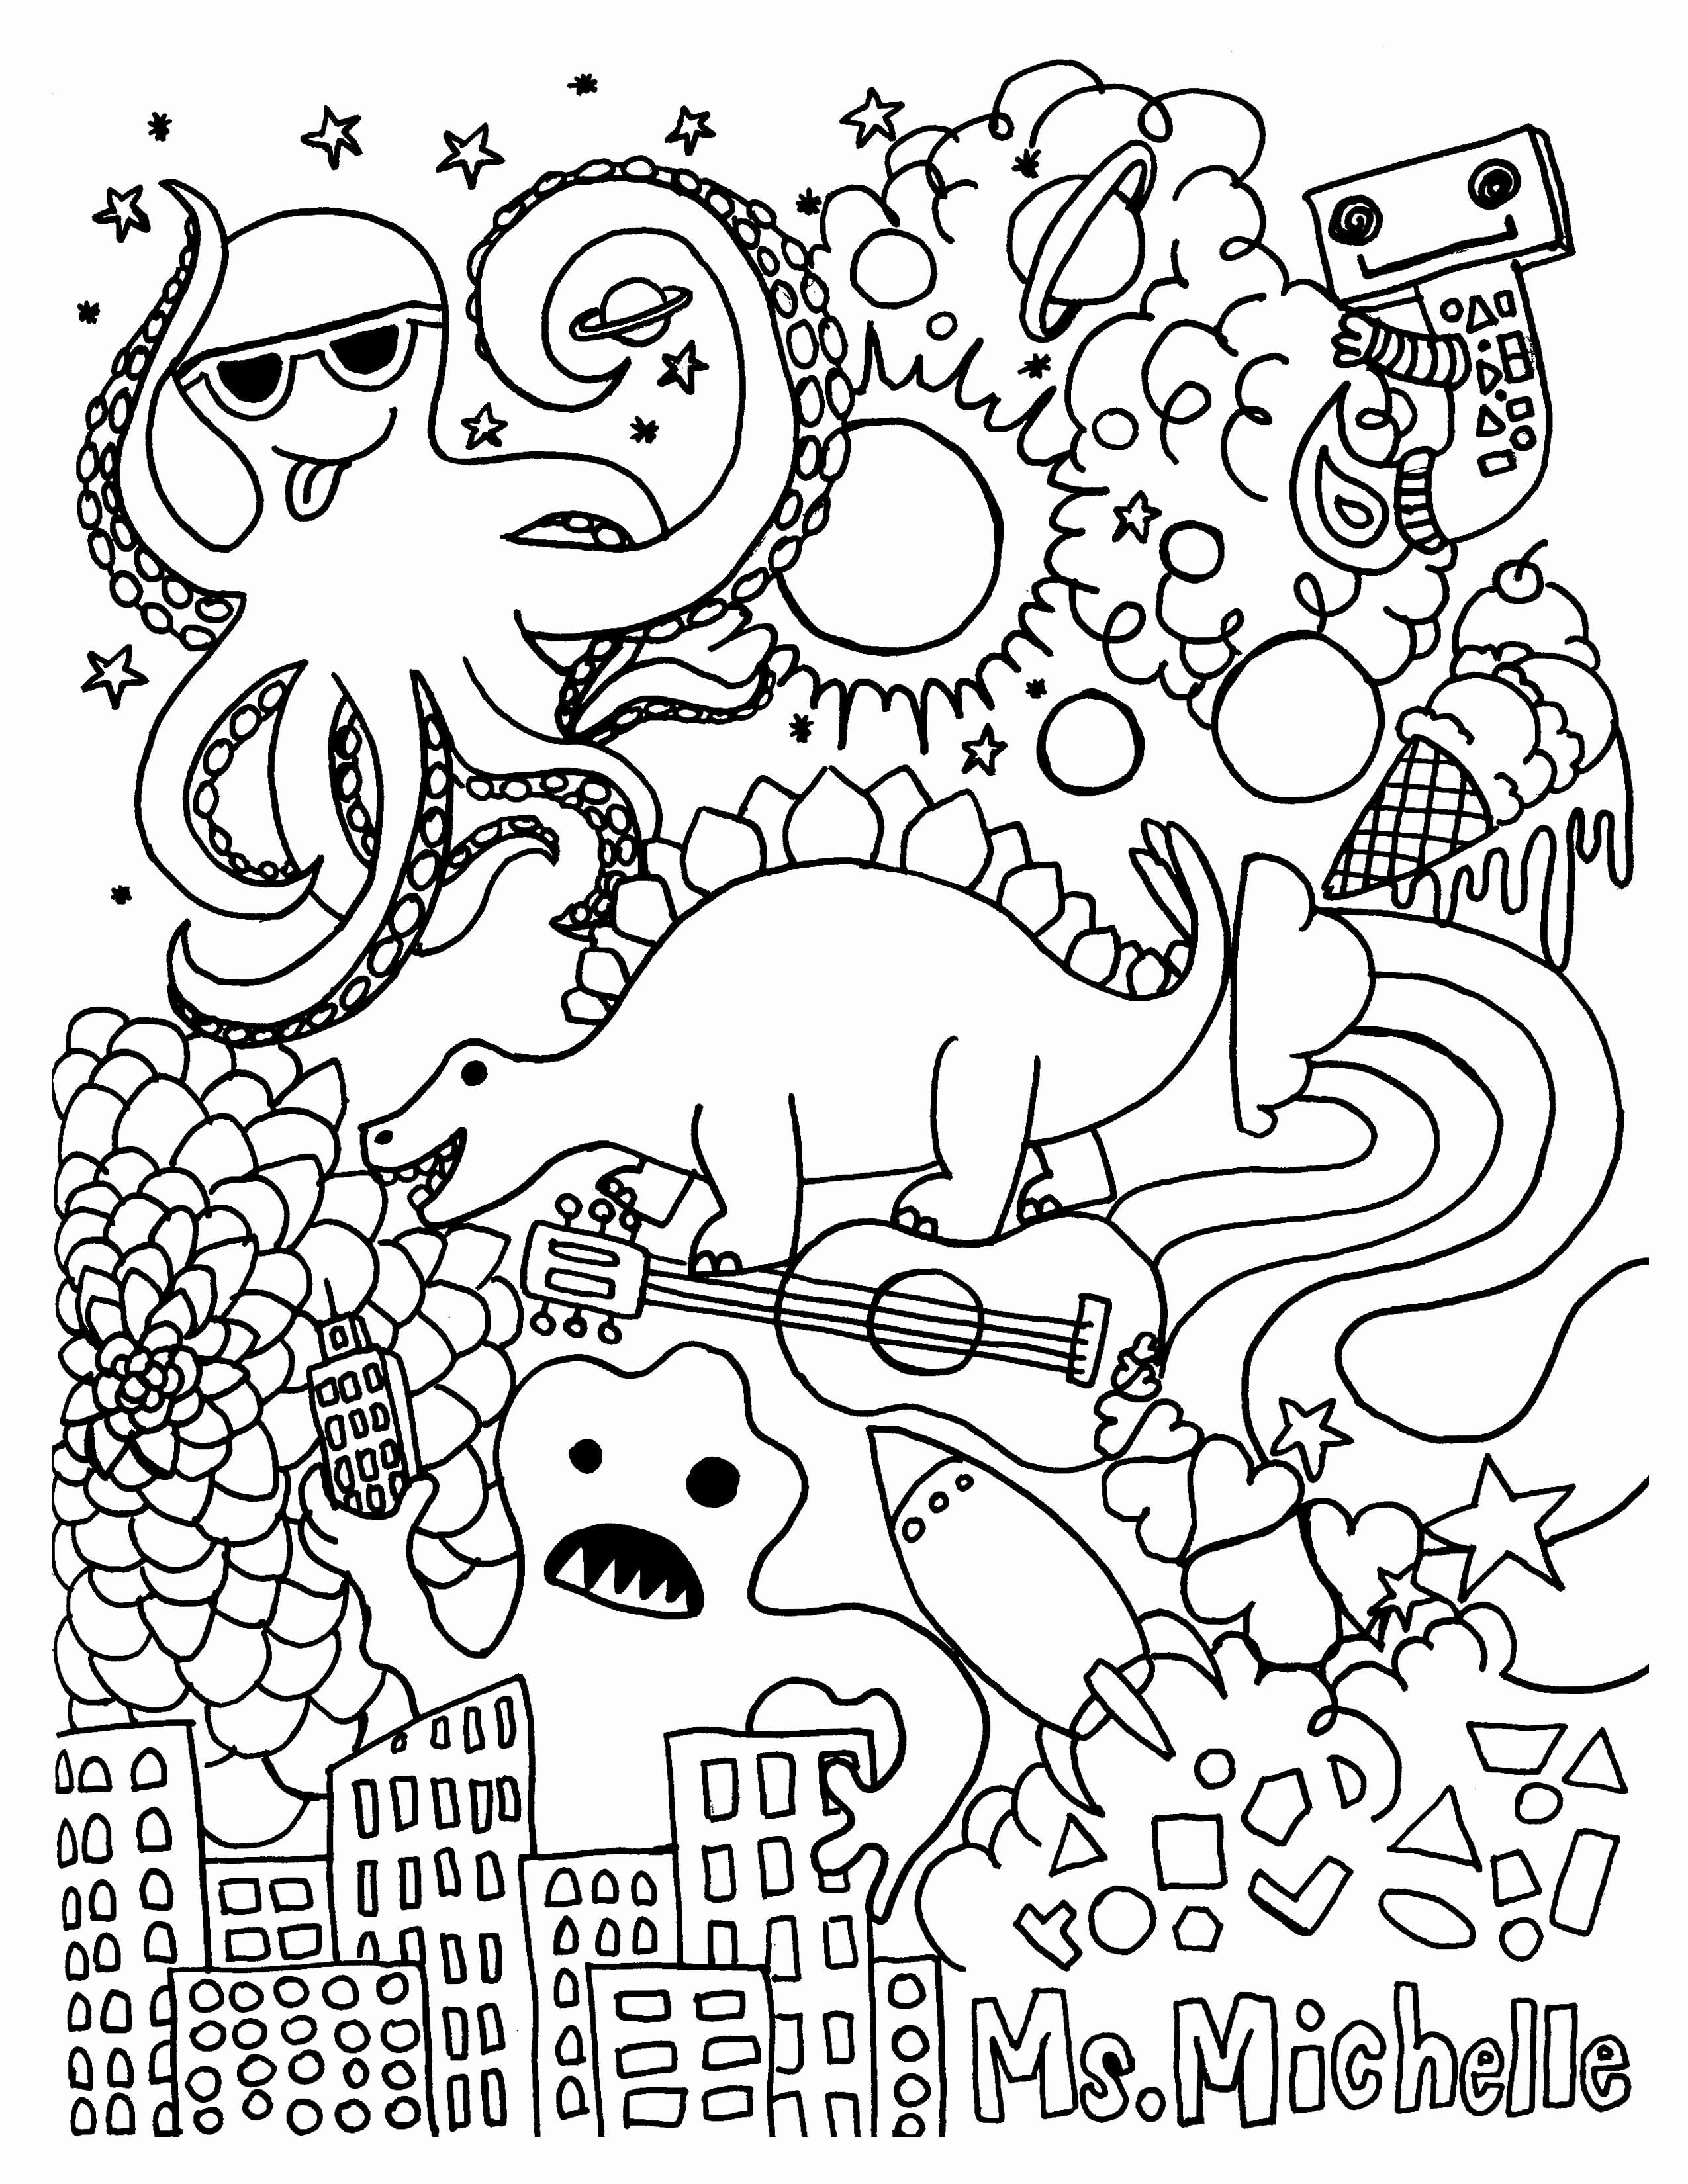 Personalized Coloring Pages A Personalized Coloring Trend Customized Pages Printable With